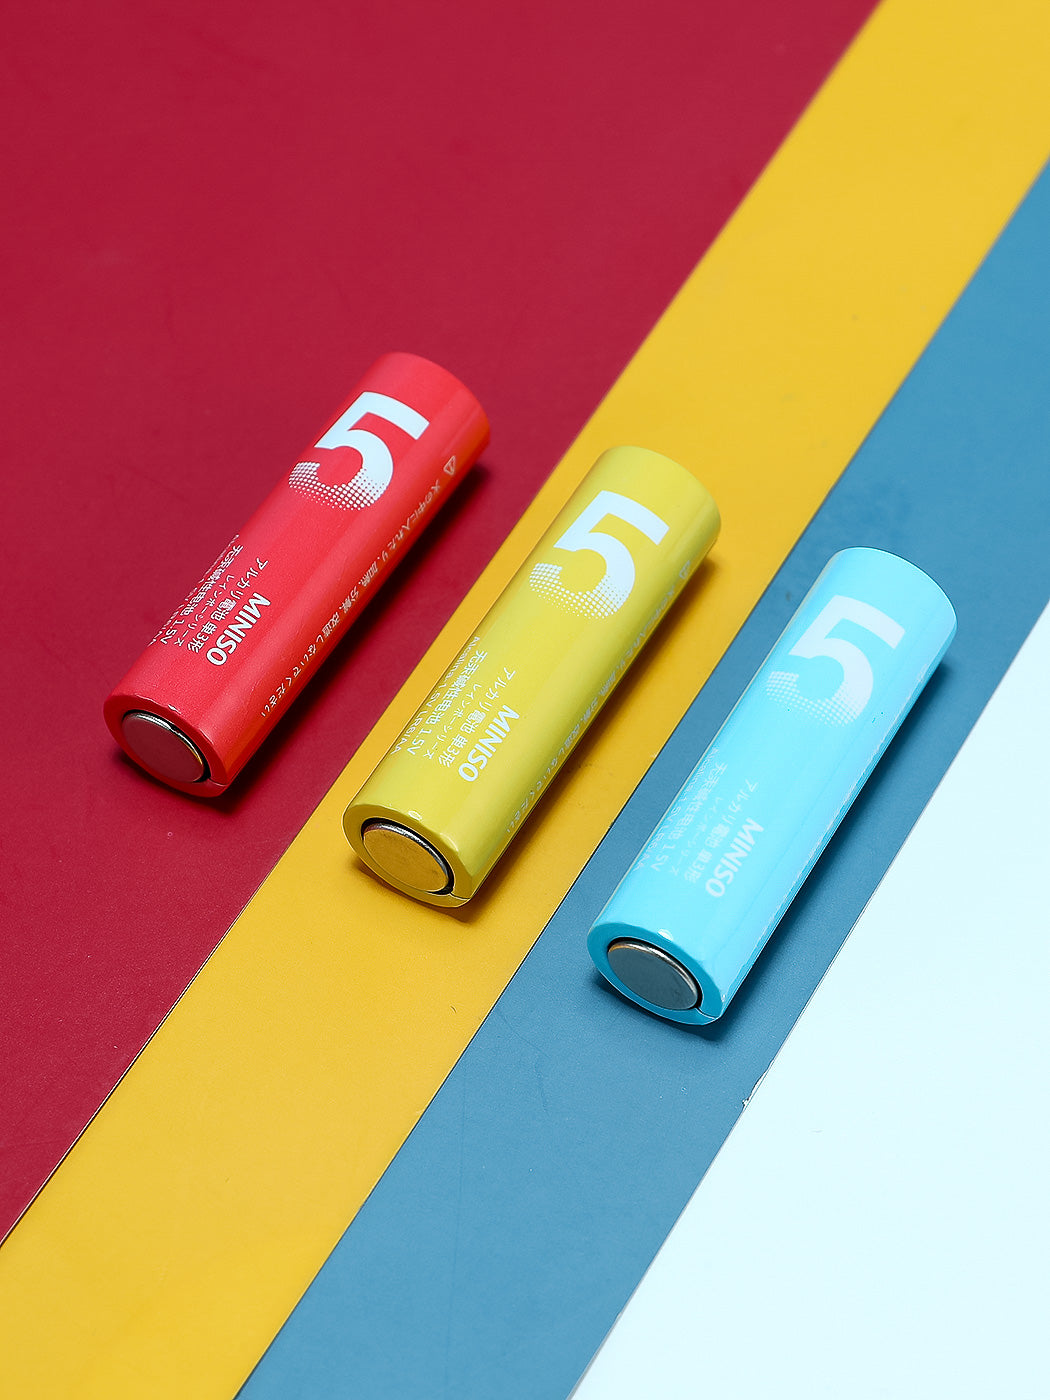 MINISO AA ALKALINE BATTERY 8 PACK(COLORFUL) 0100027961 BATTERY MINISO